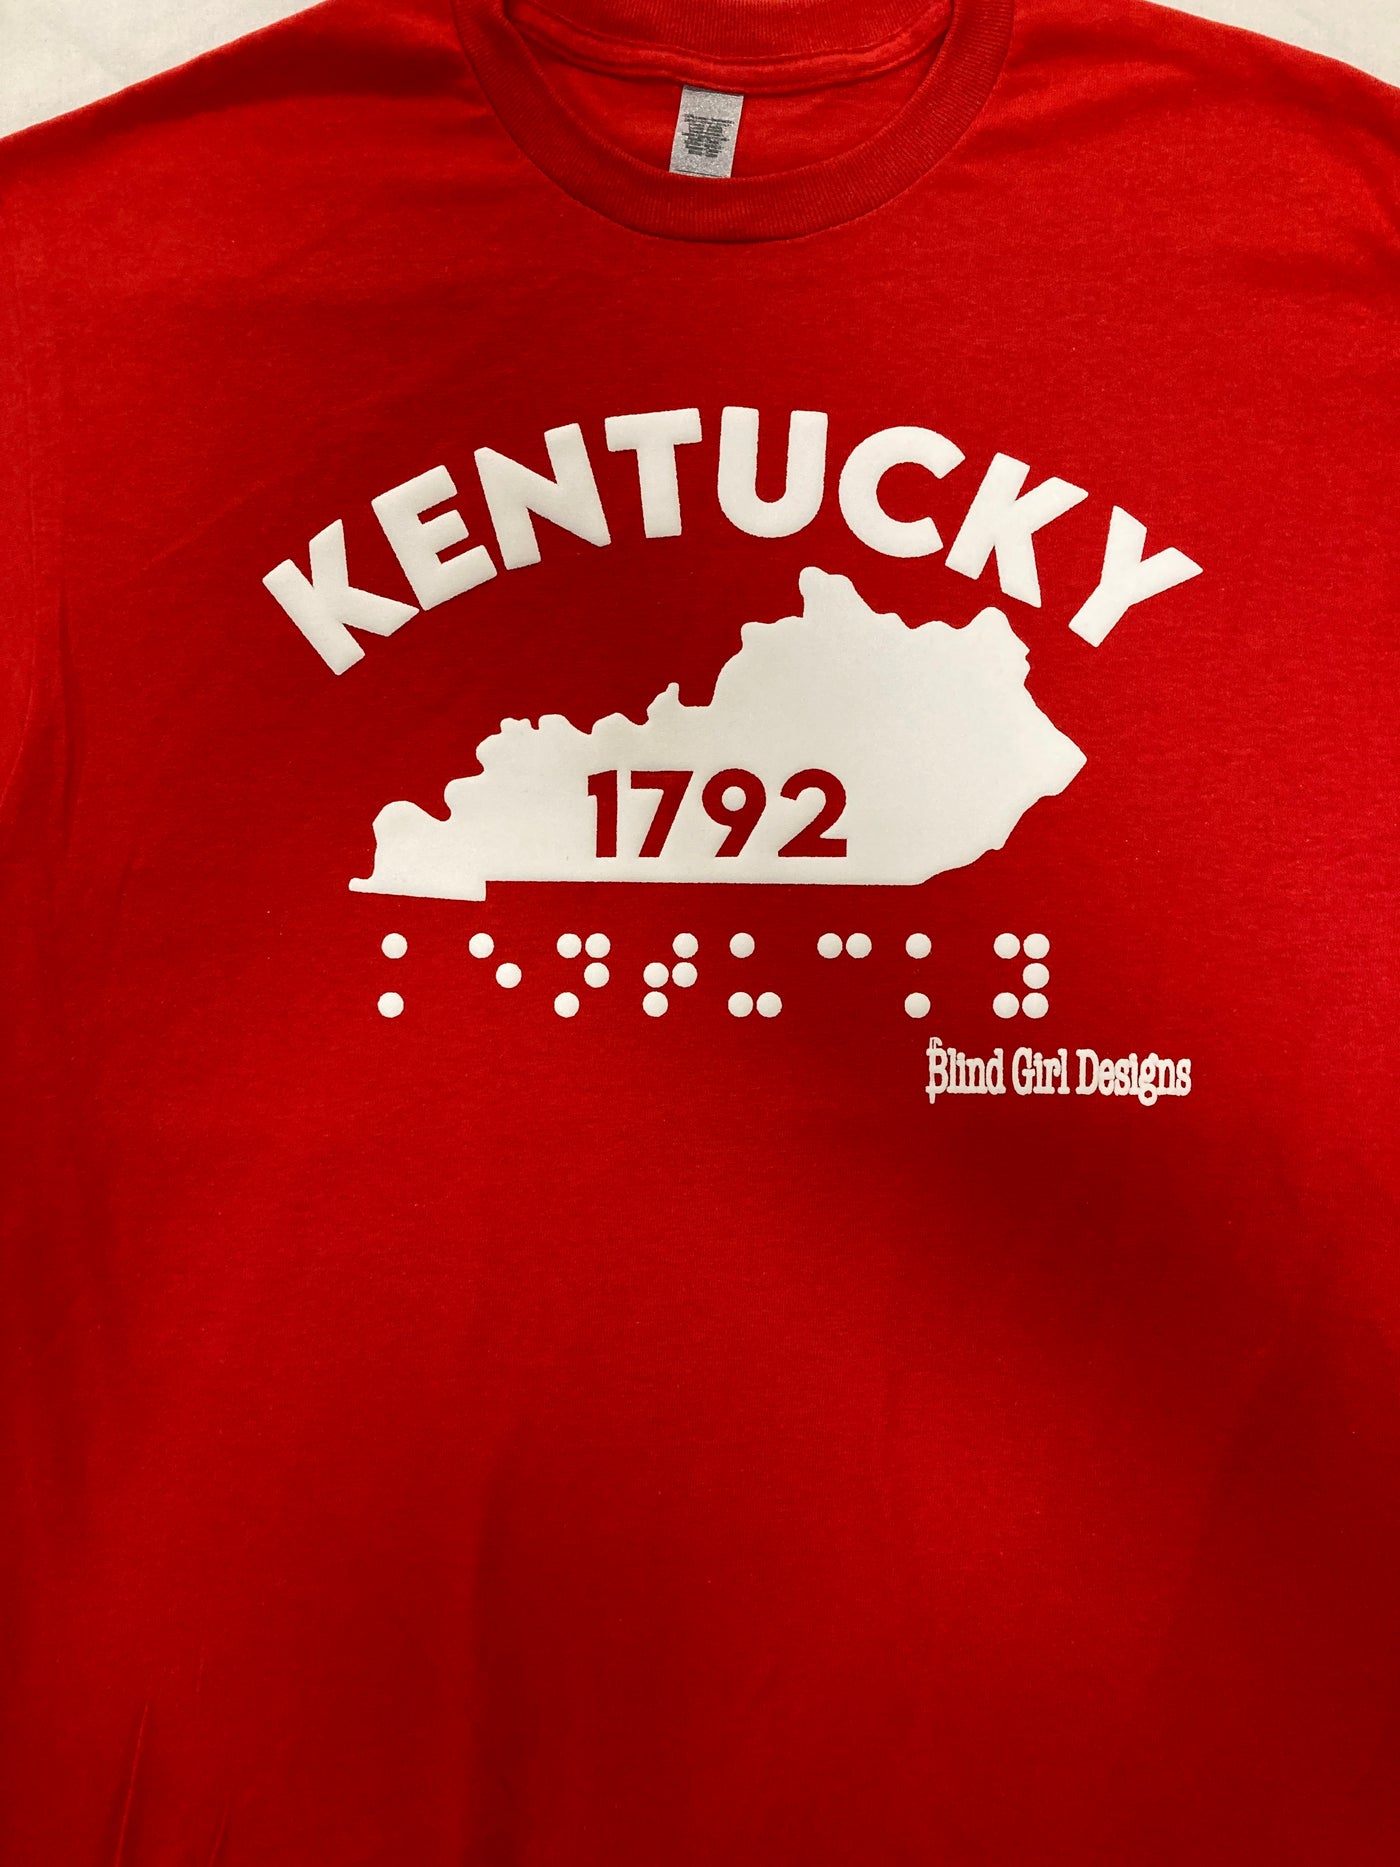 SALE!  3D! Kentucky State Braille  T-Shirt - RED